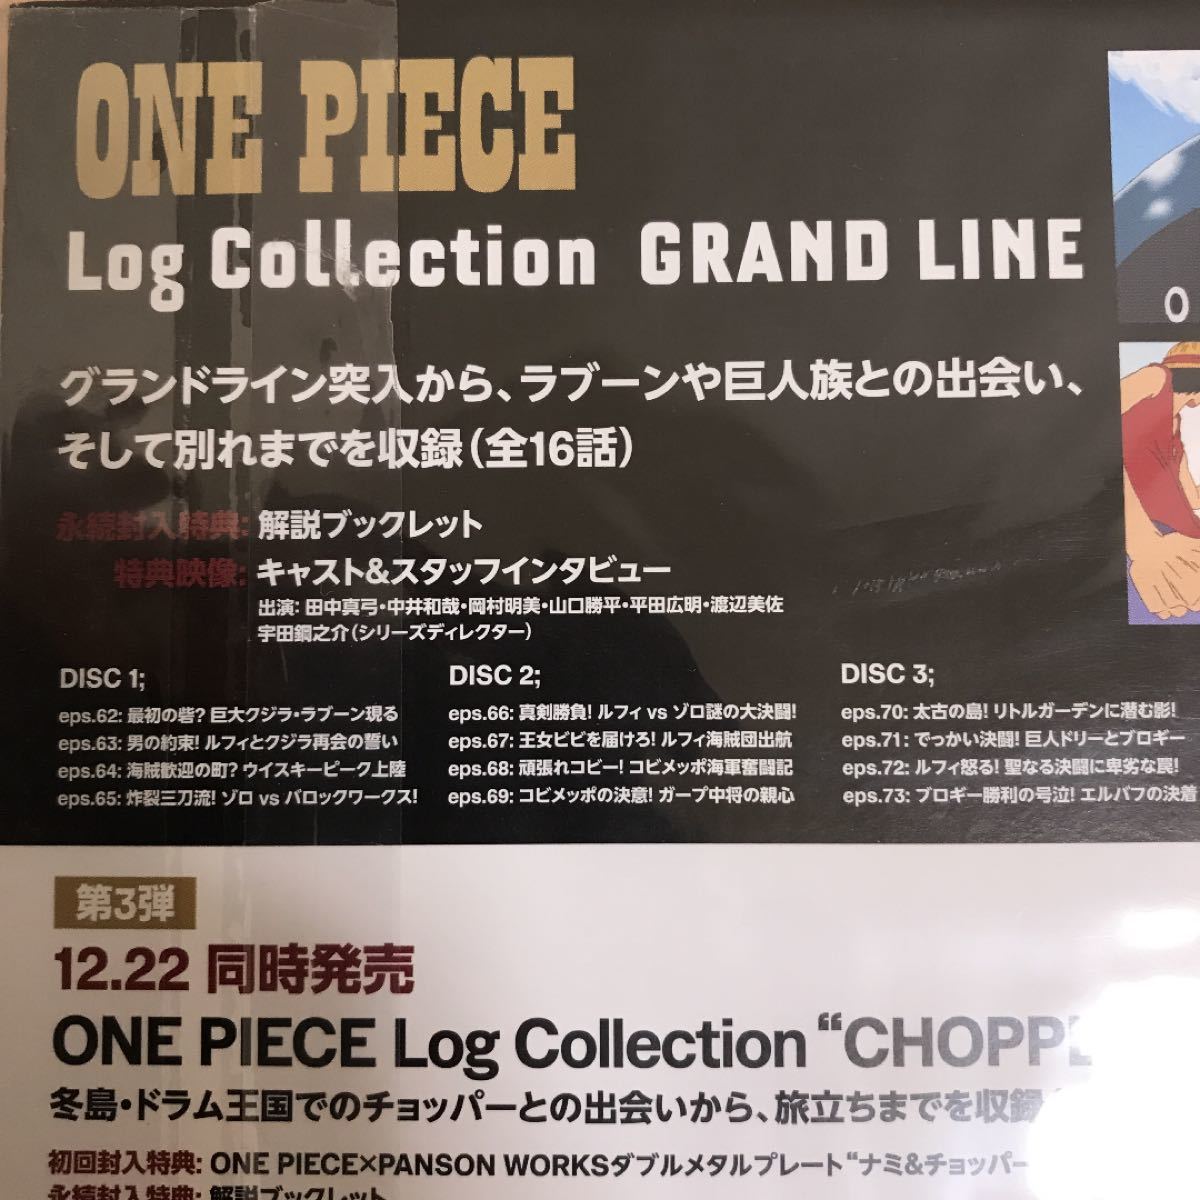 「ONE PIECE Log Collection""GRAND LINE""〈4枚組〉」期間限定生産